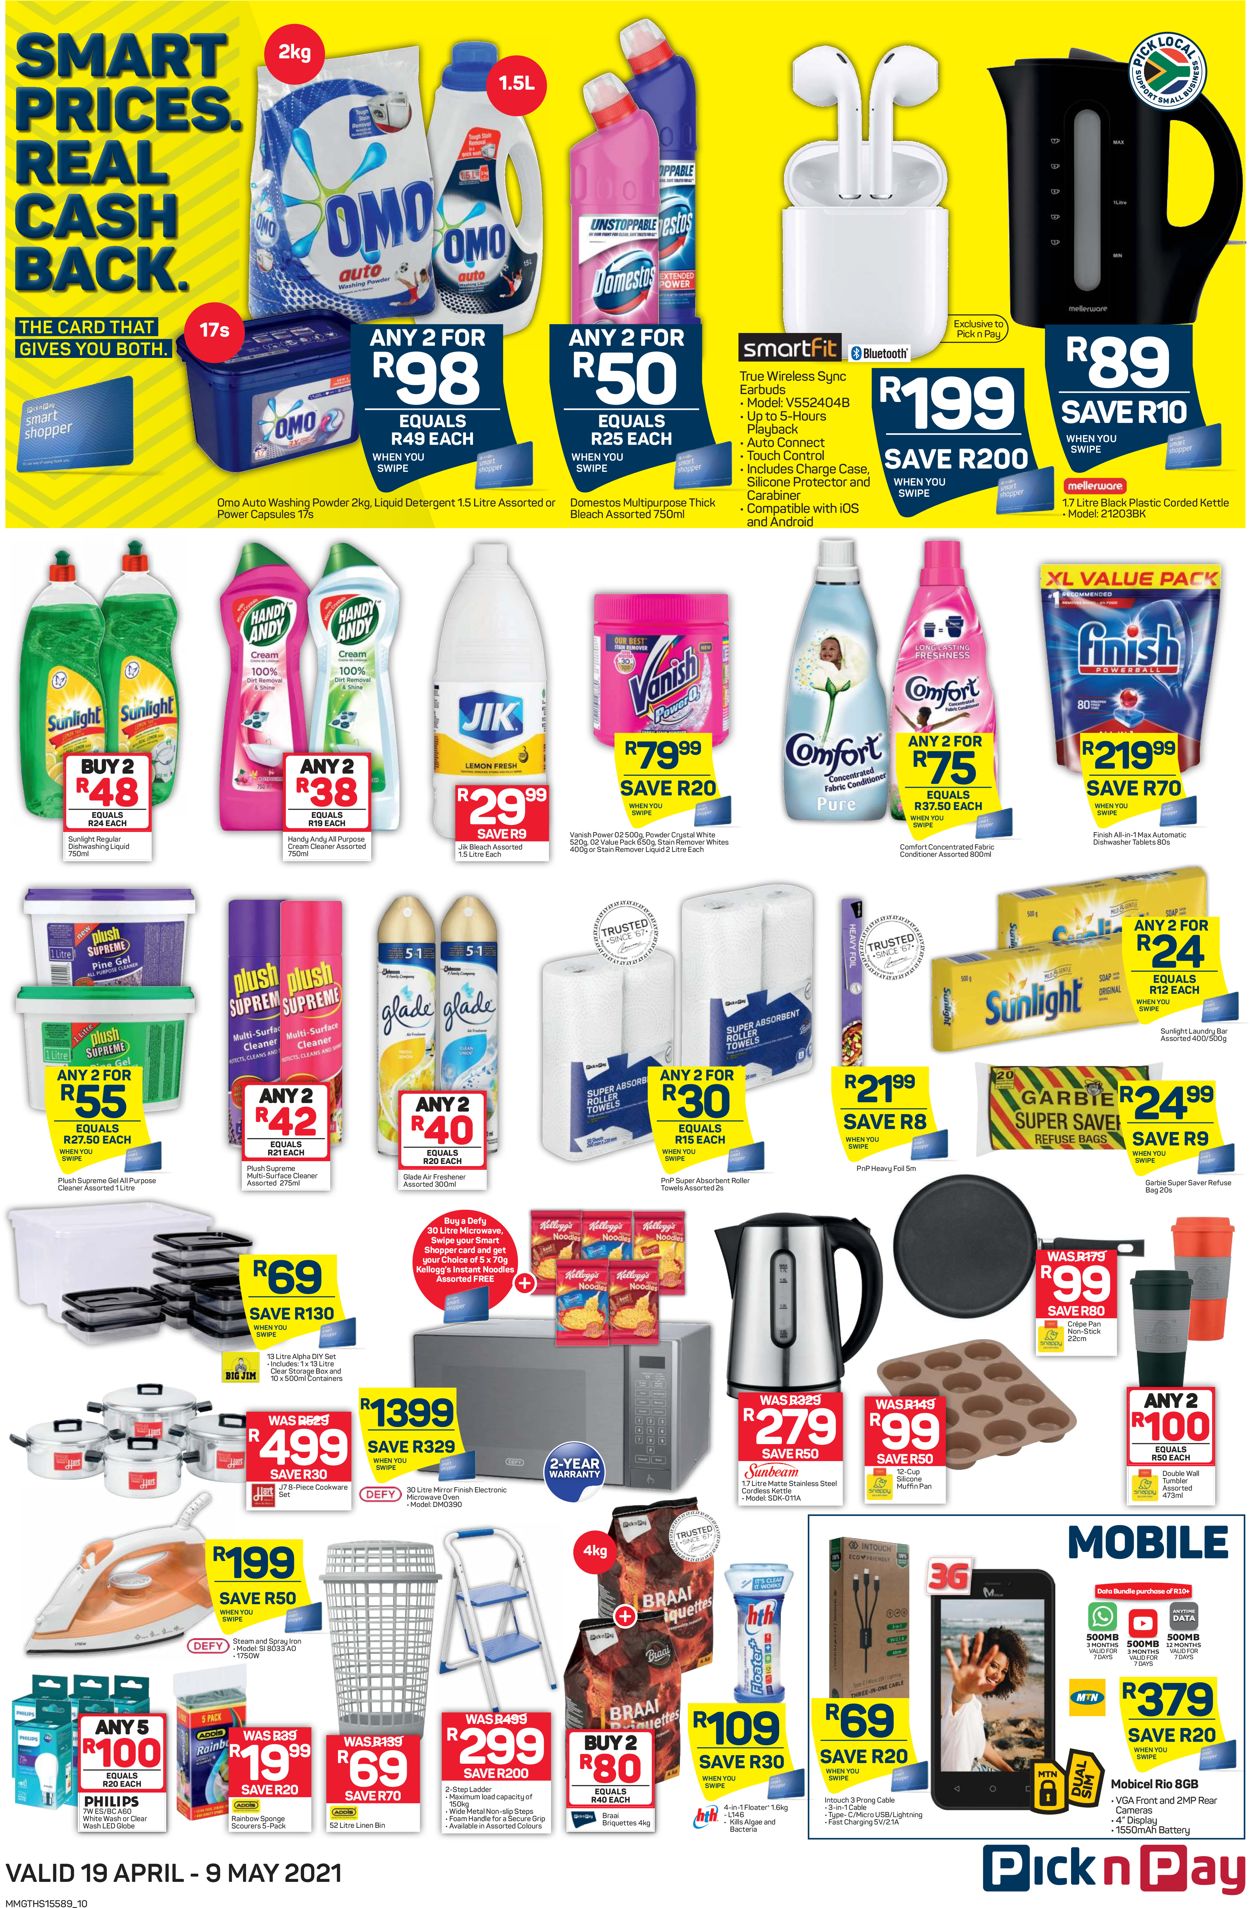 Pick n Pay Catalogue - 2021/04/19-2021/04/25 (Page 10)